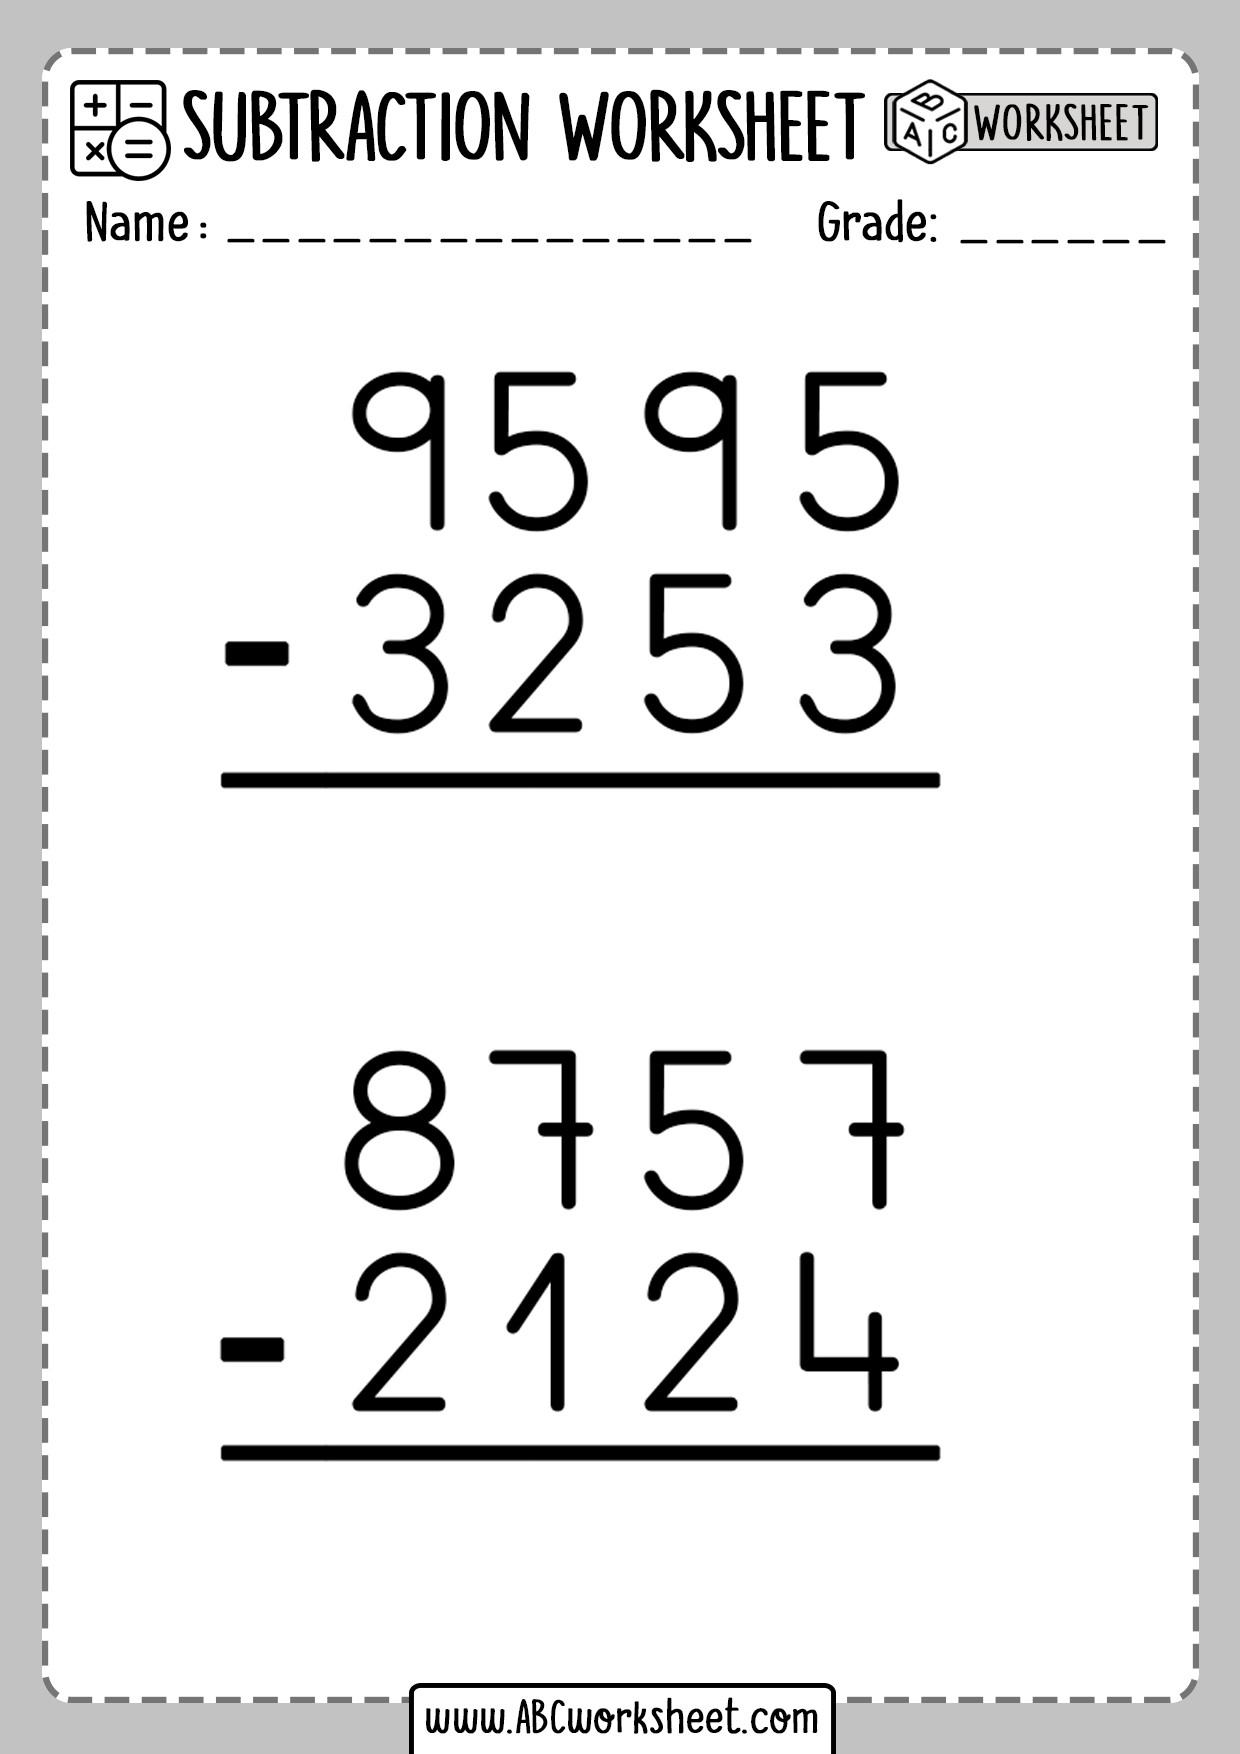 worksheet-on-subtraction-with-regrouping-worksheet24